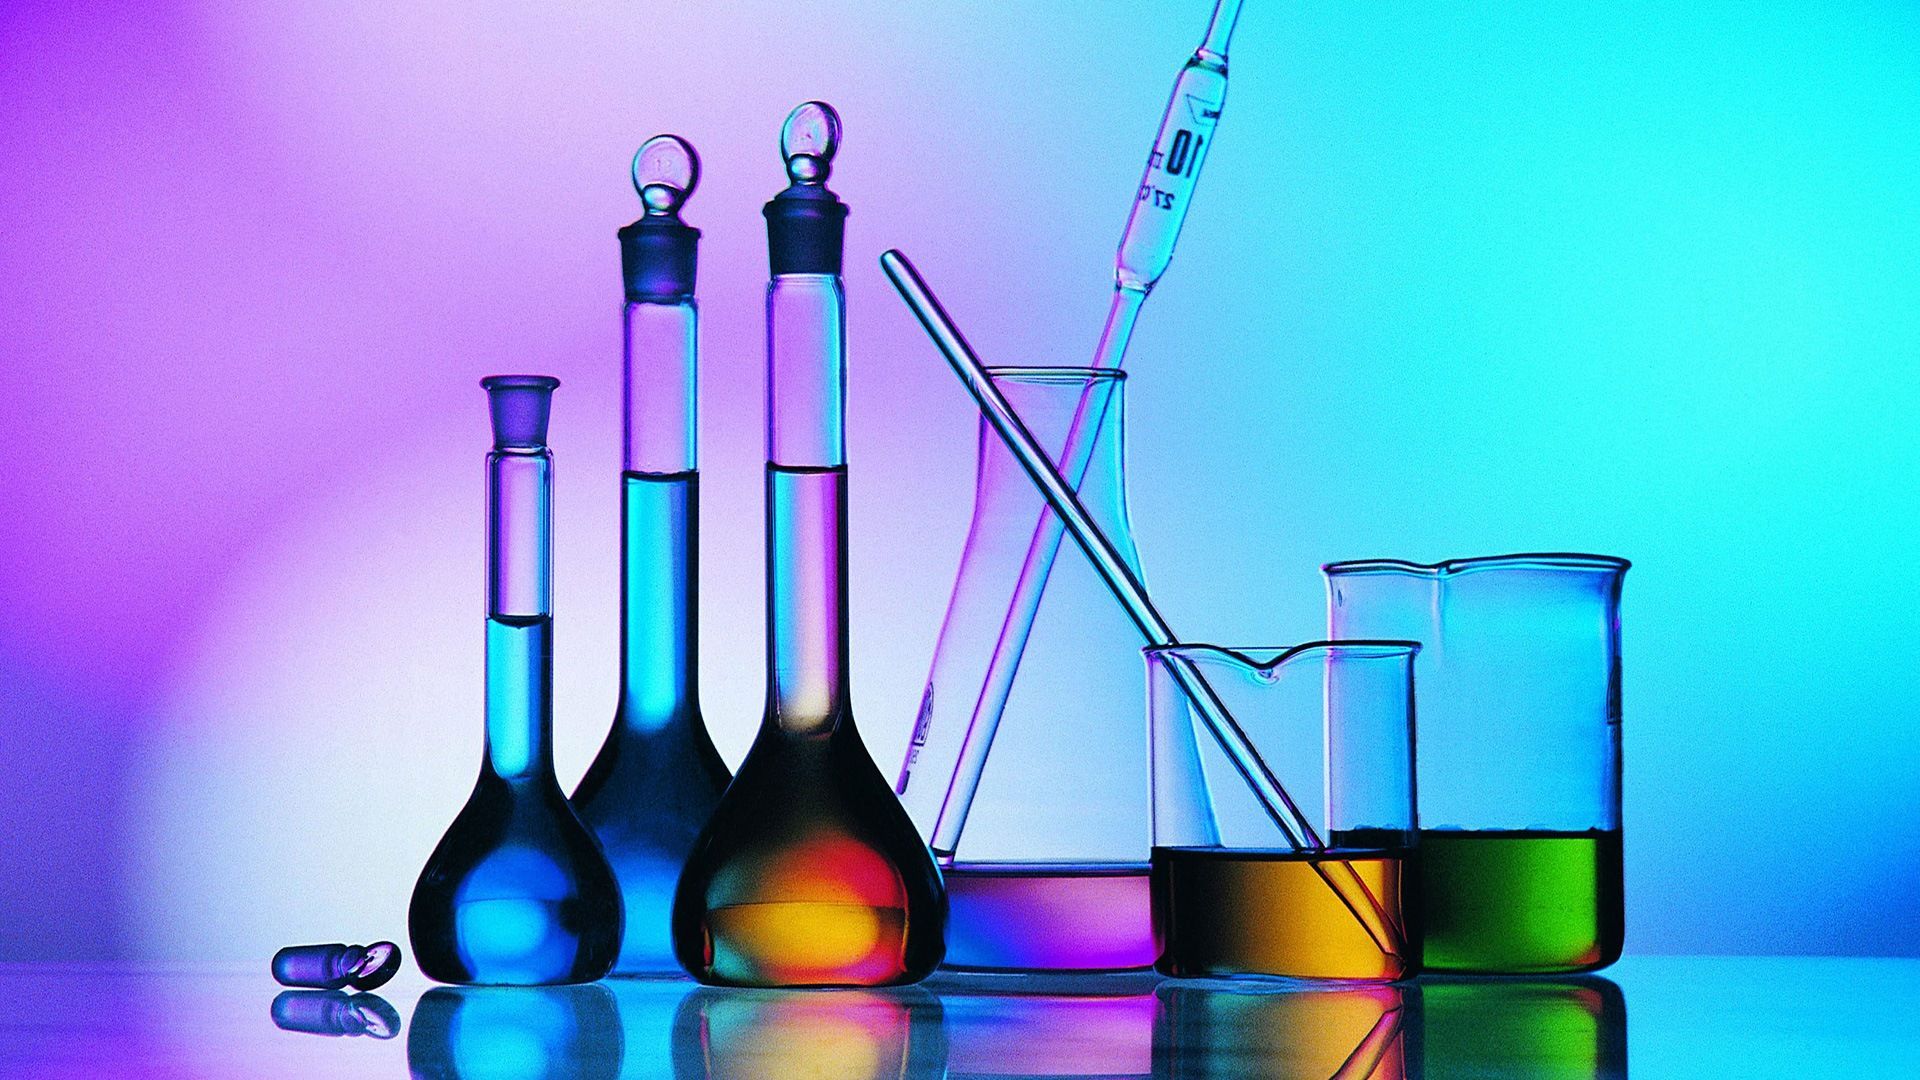 A group of test tubes and beakers - Chemistry